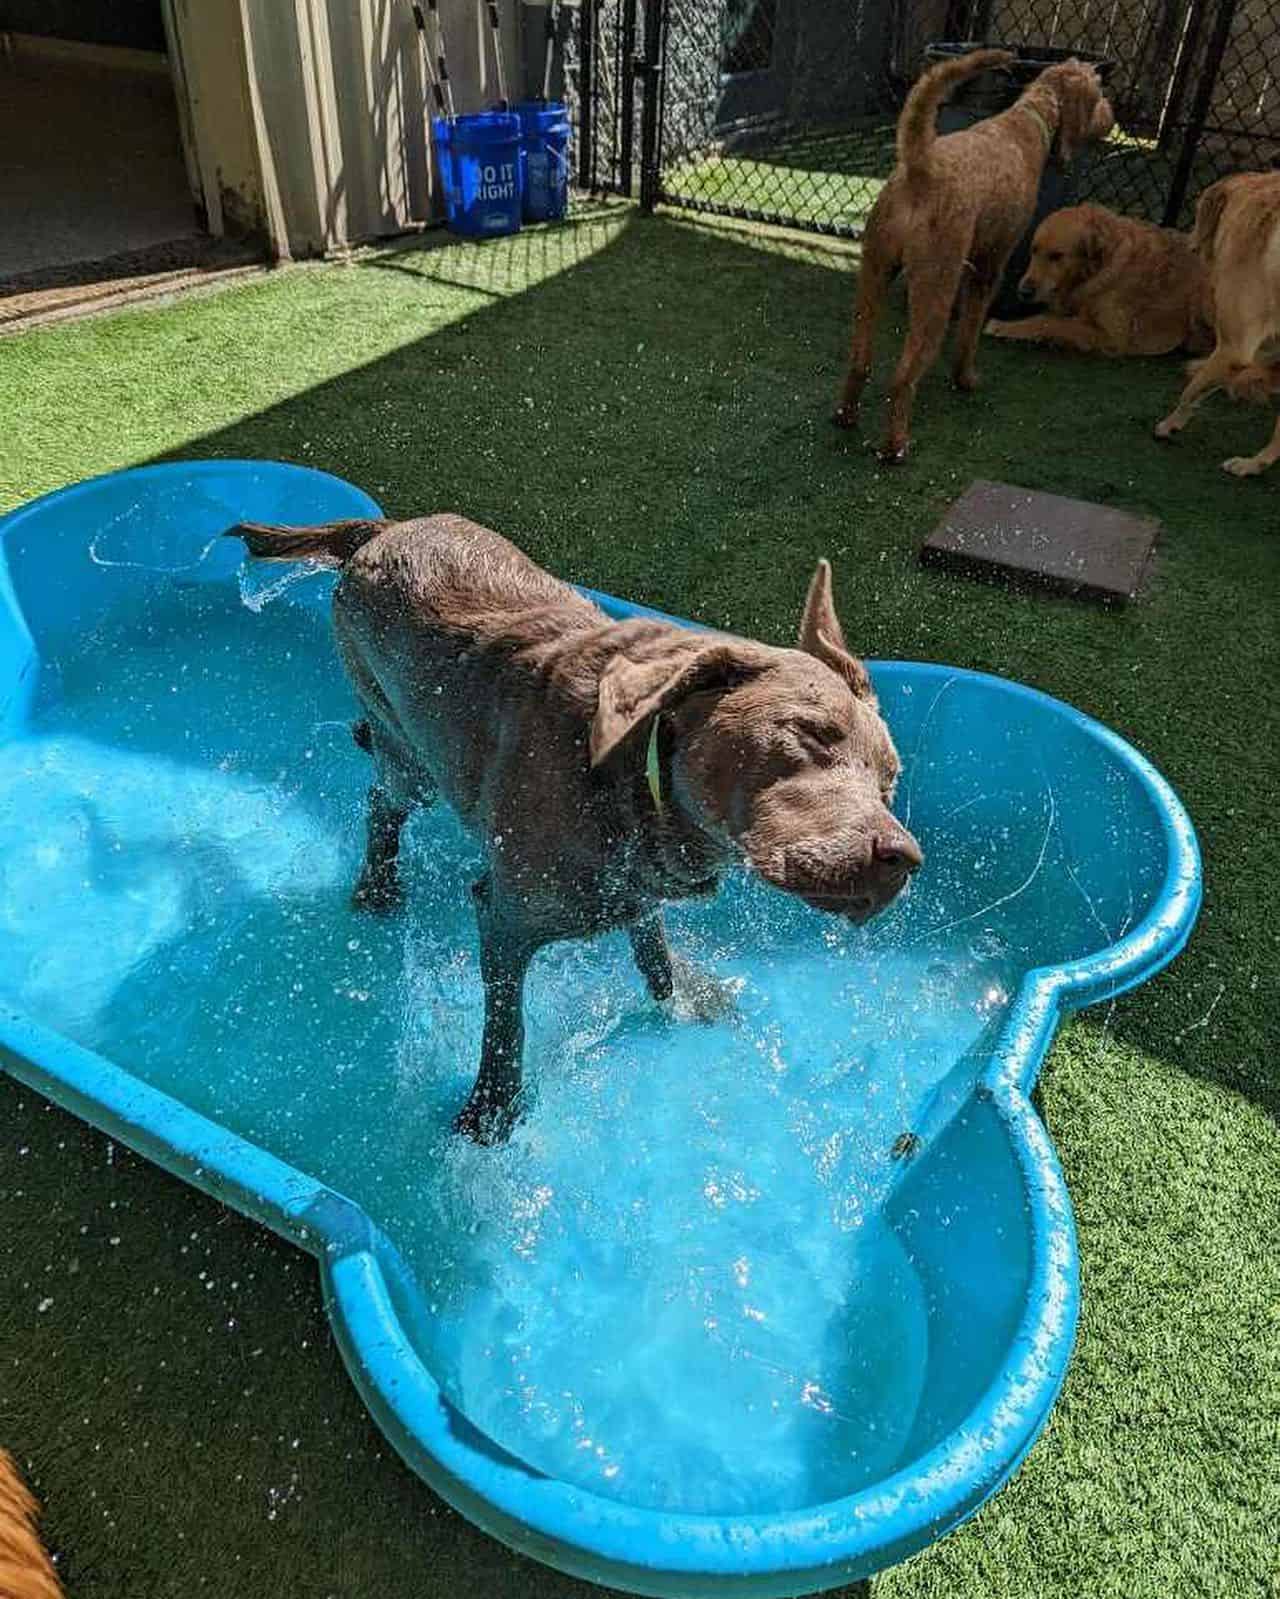 Dog playing in pool at a dog park in Arkansas